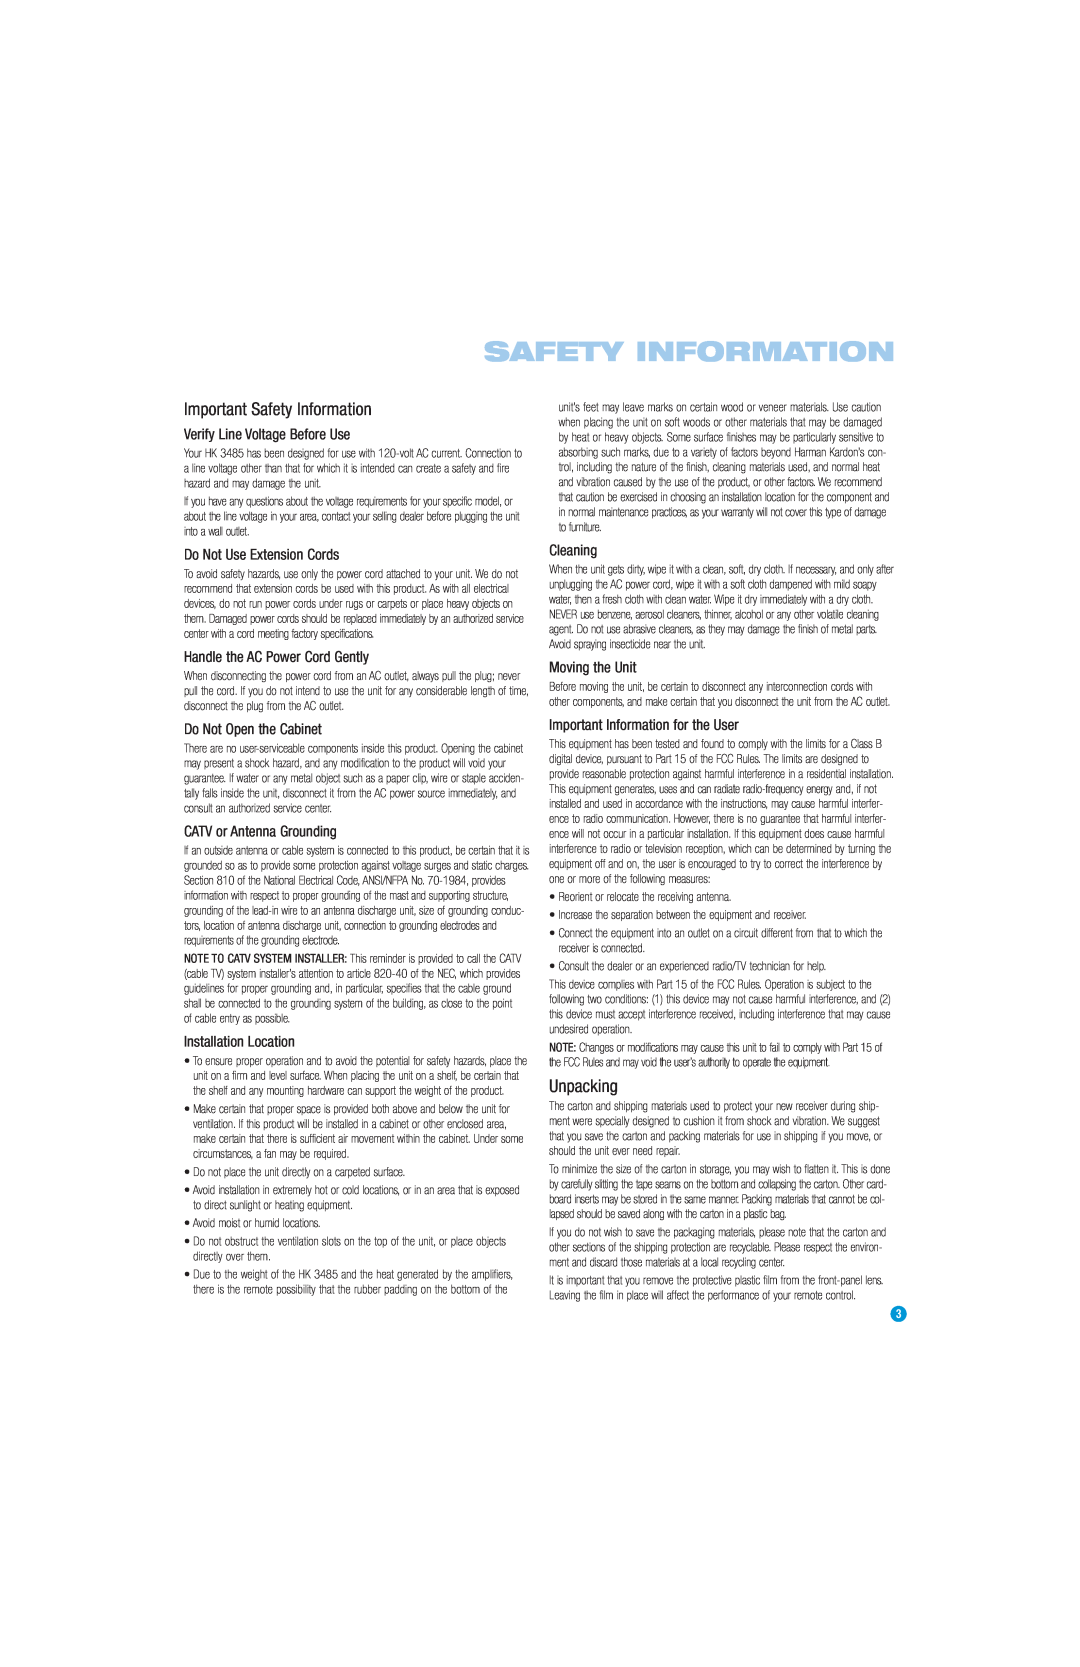 Harman-Kardon HK 3485 Important Safety Information, Unpacking, Verify Line Voltage Before Use, Do Not Use Extension Cords 